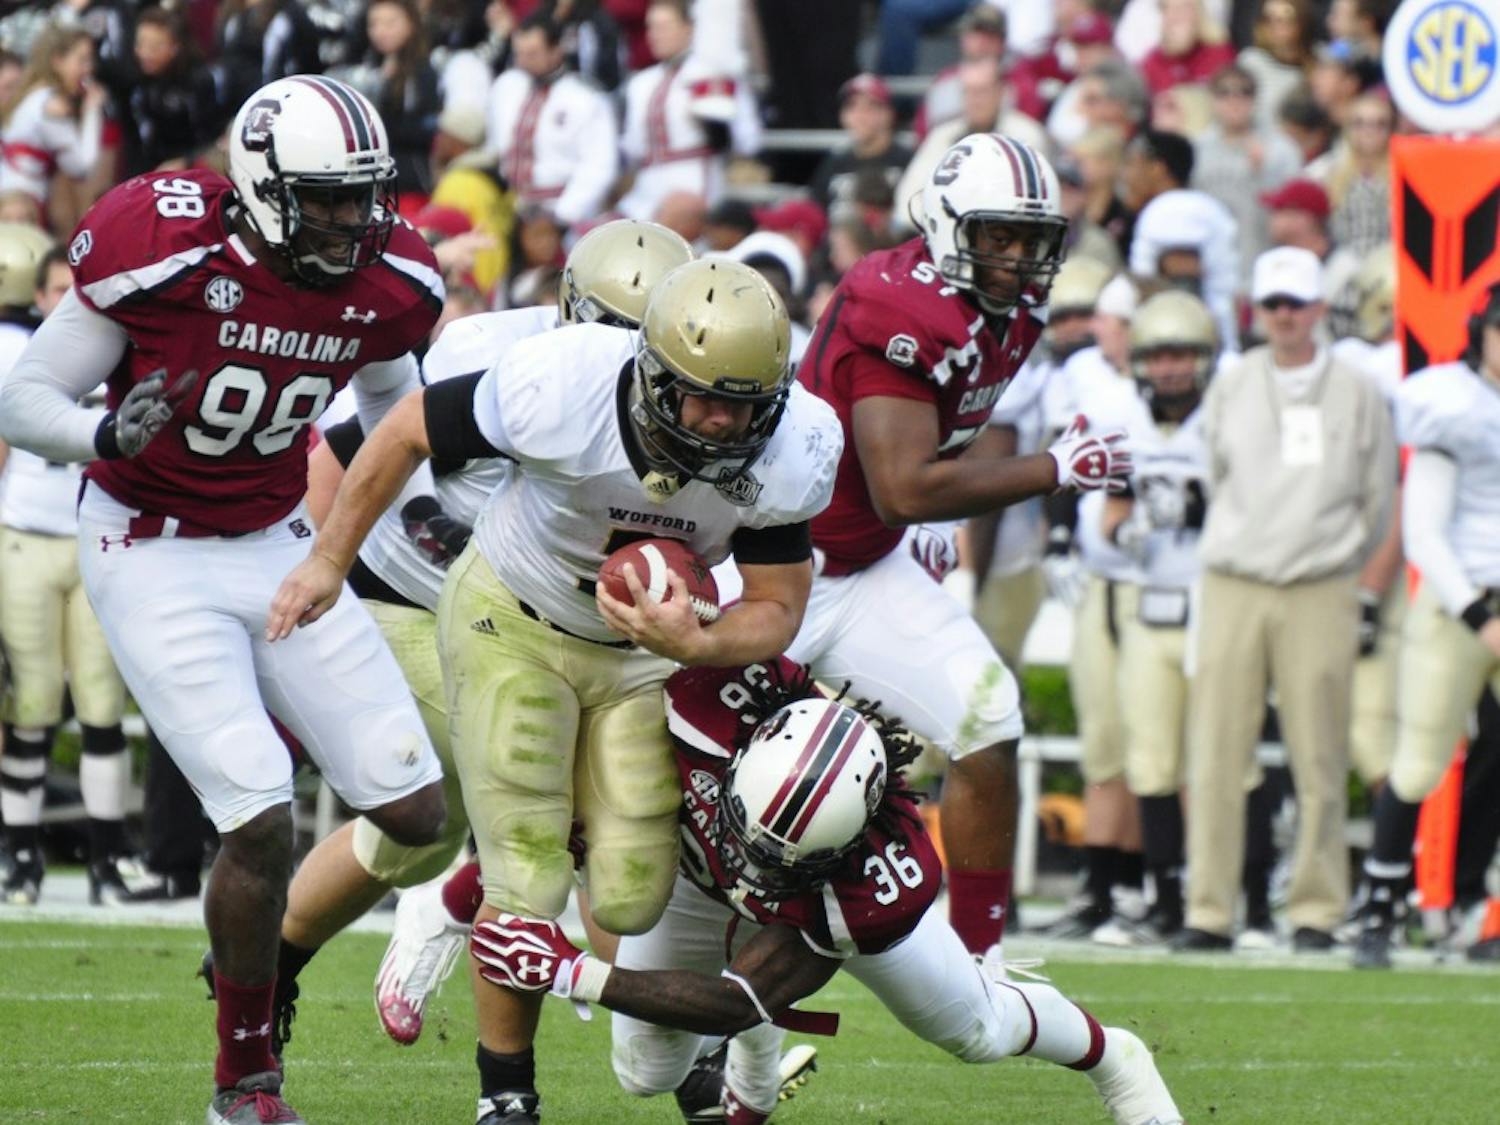 South Carolina senior free safety DJ Swearinger (36) had a forced fumble against Wofford College in the Gamecocks’ 24-7 win on Senior Day at home Saturday.